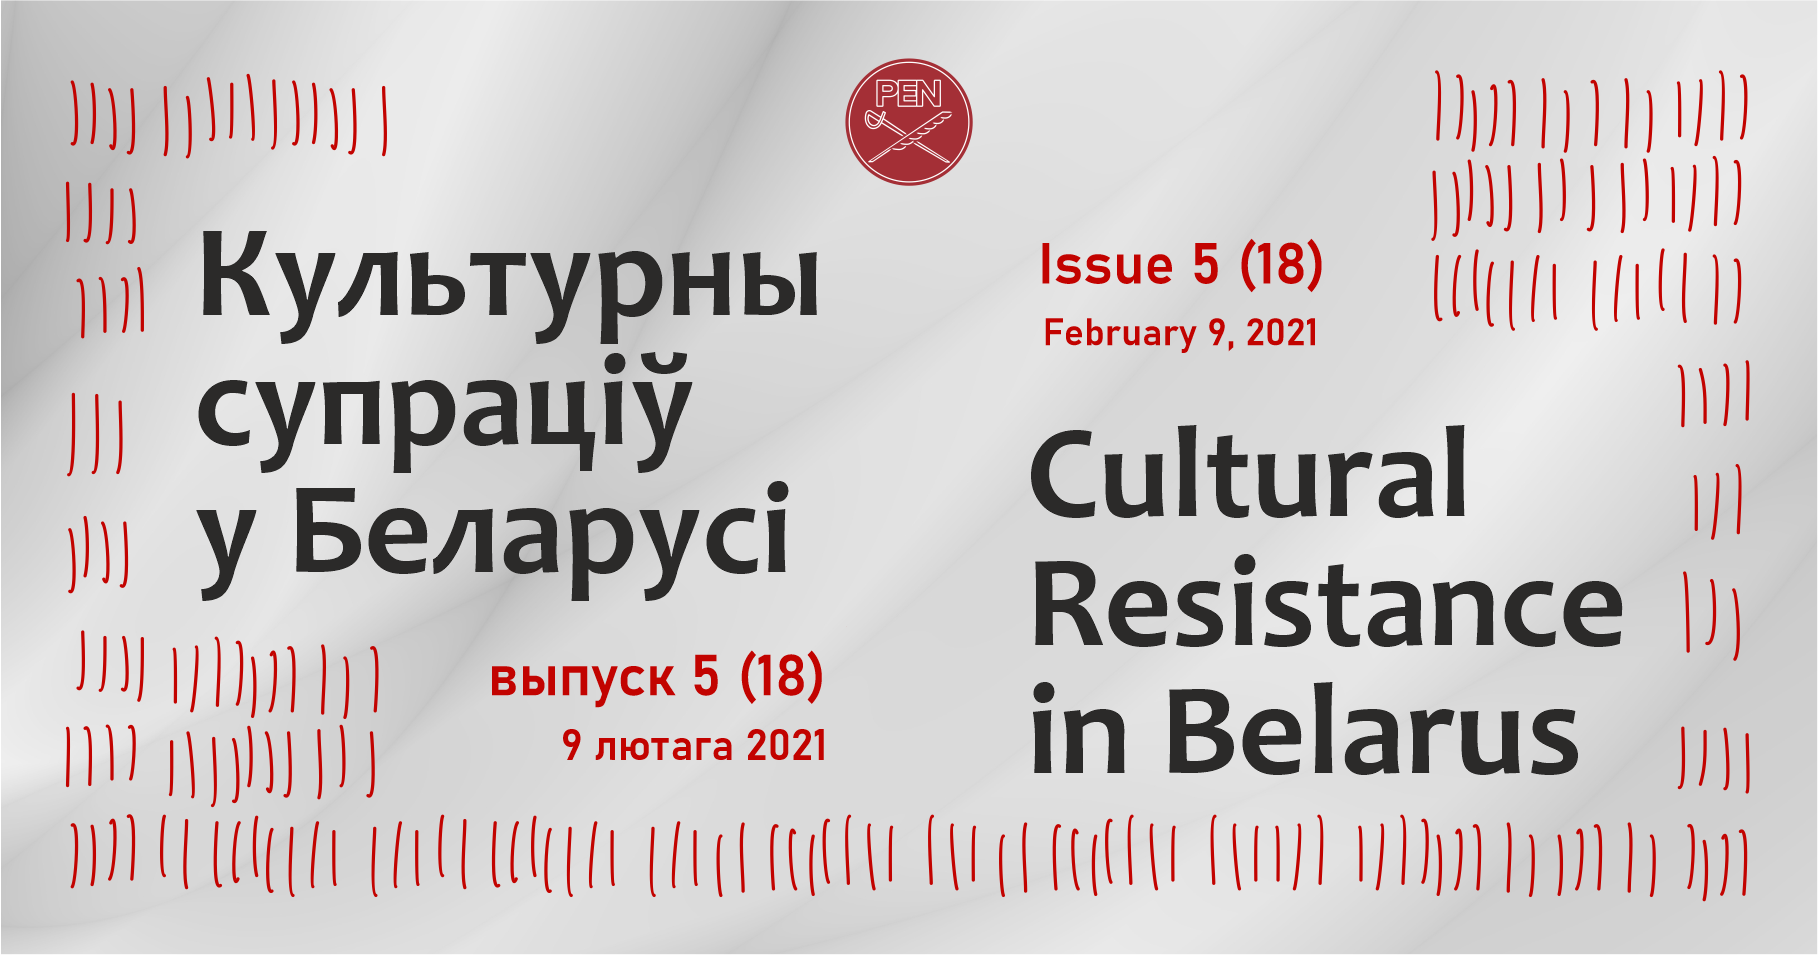 “Your faith will live long” – Issue 18: Belarusian Culture During the Socio-Political Crisis